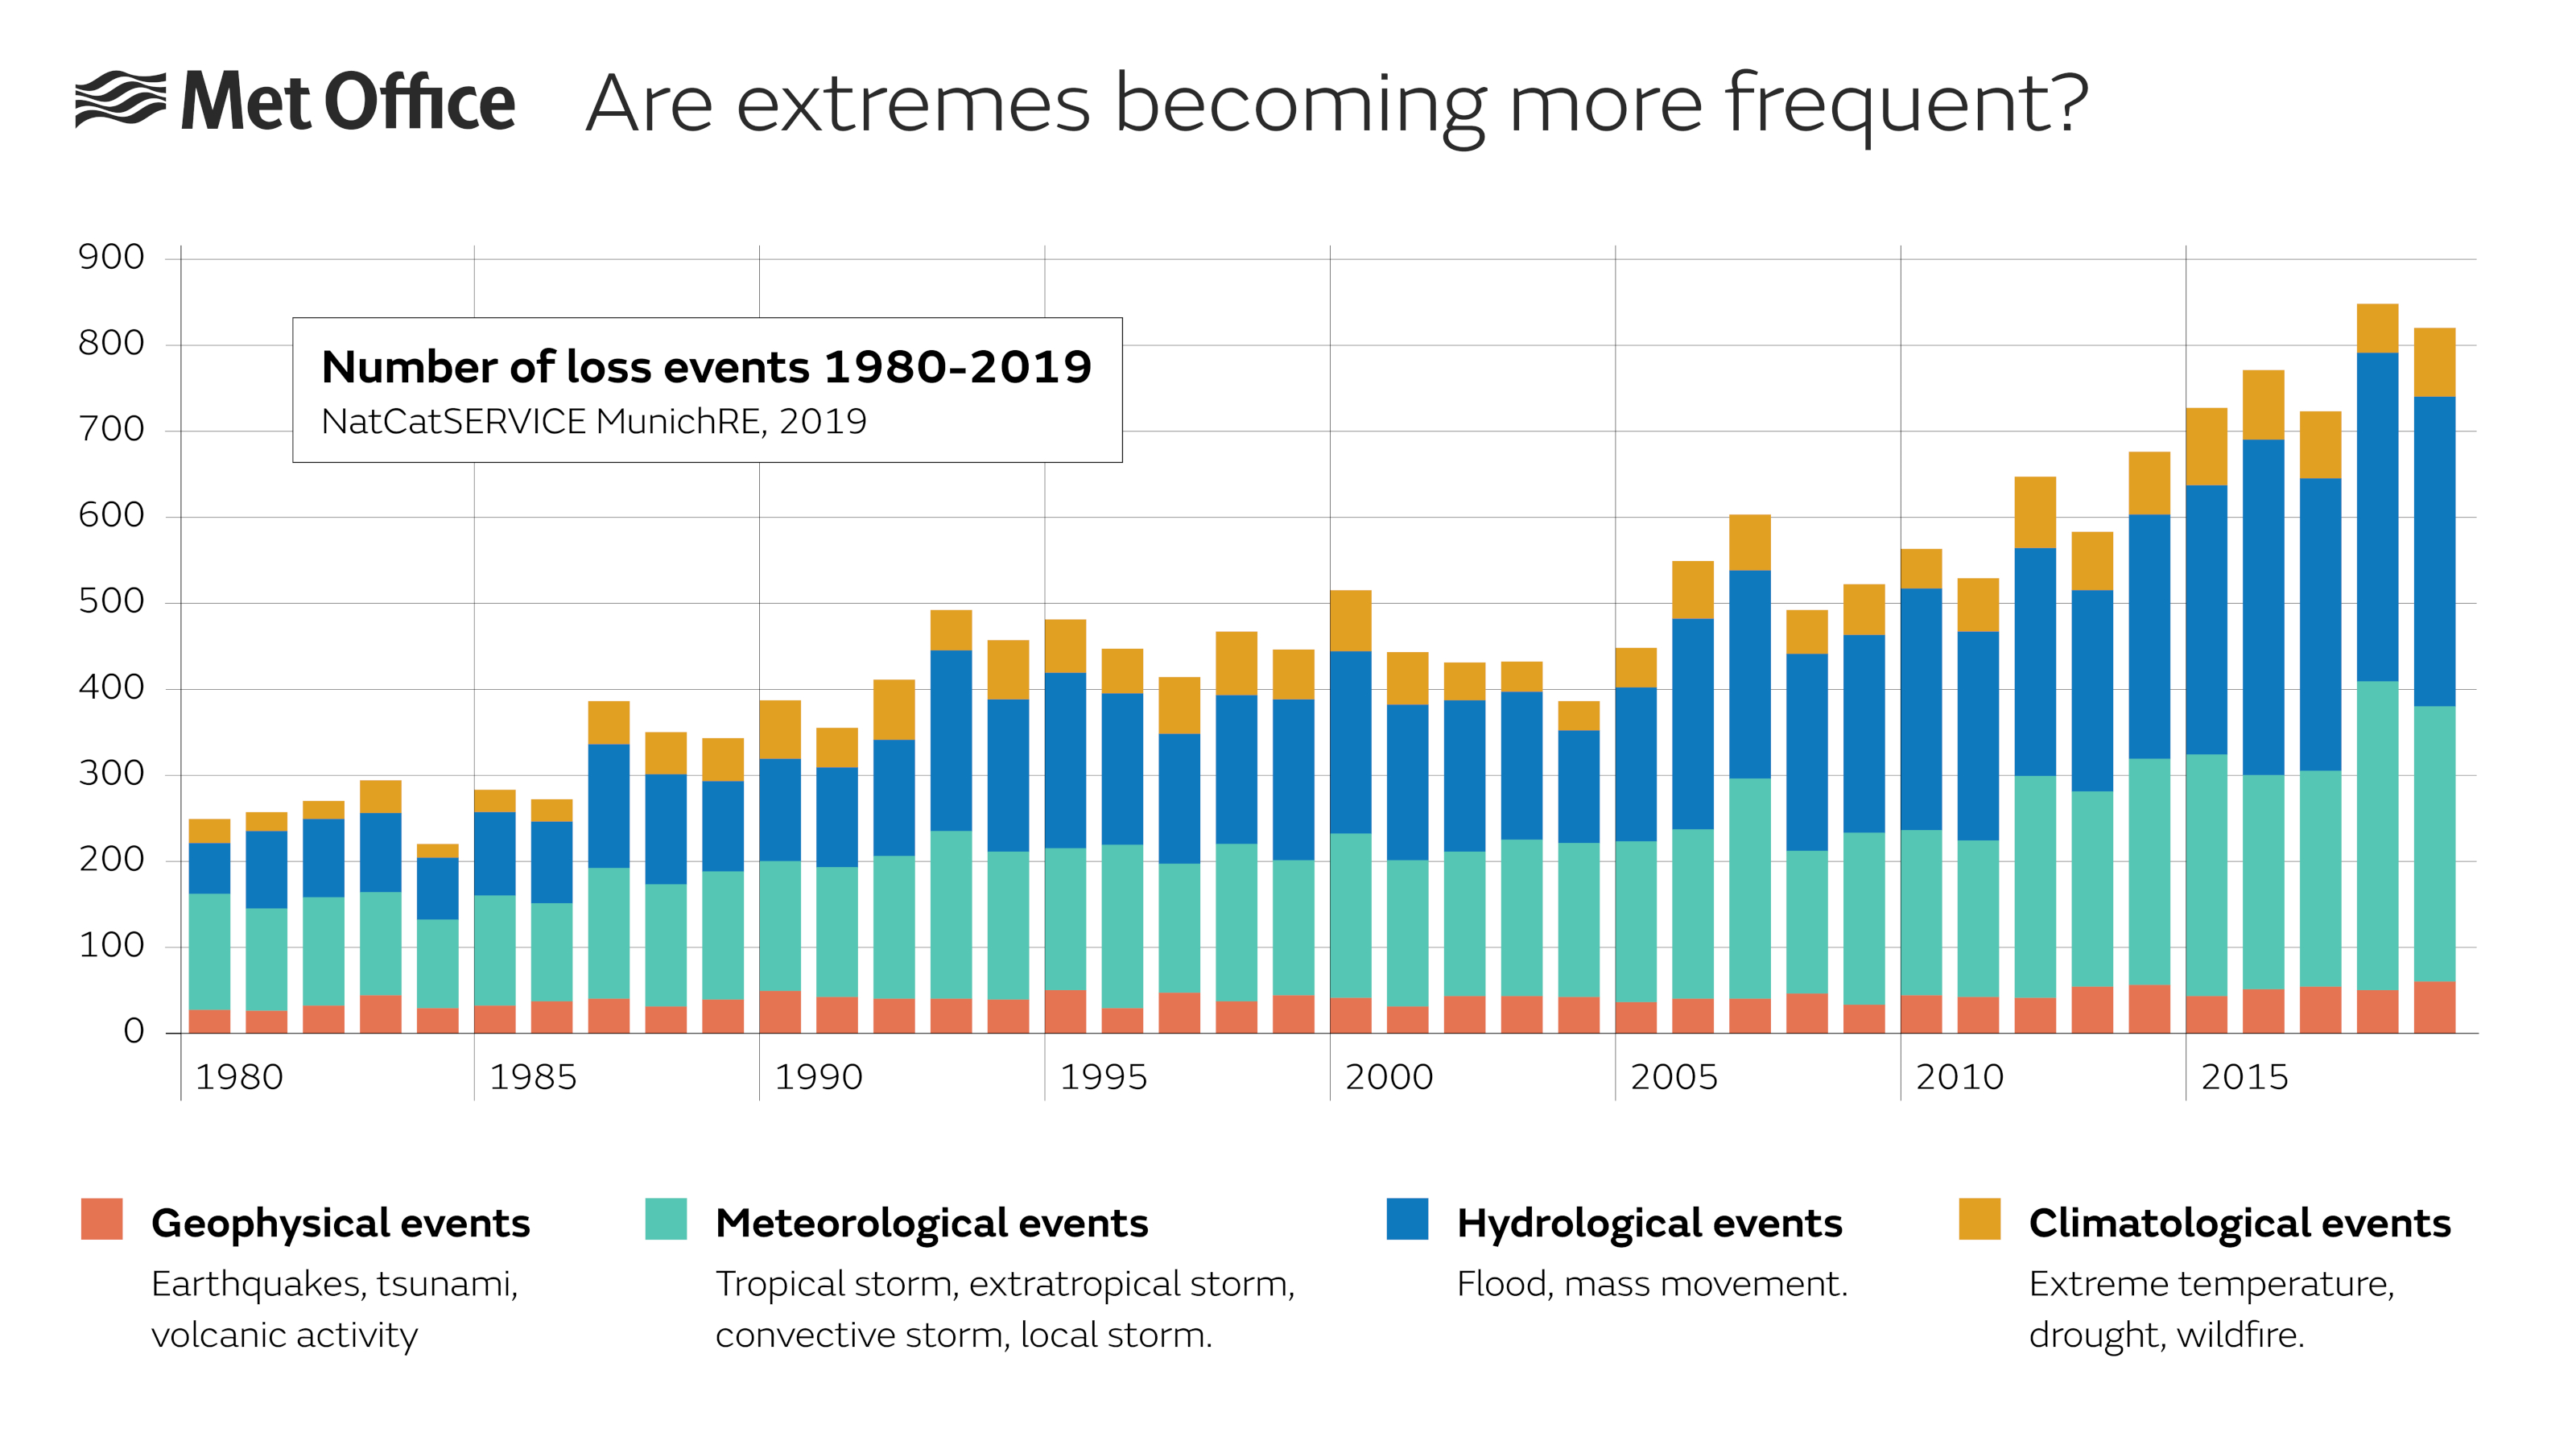 Bar chart showing the increase in events that cause loss, between 1980 and 2019. Meteorological, hydrological and climatological events all increase over the period. Approximately 250 events were recorded in 1980, with just over 800 in 2019.